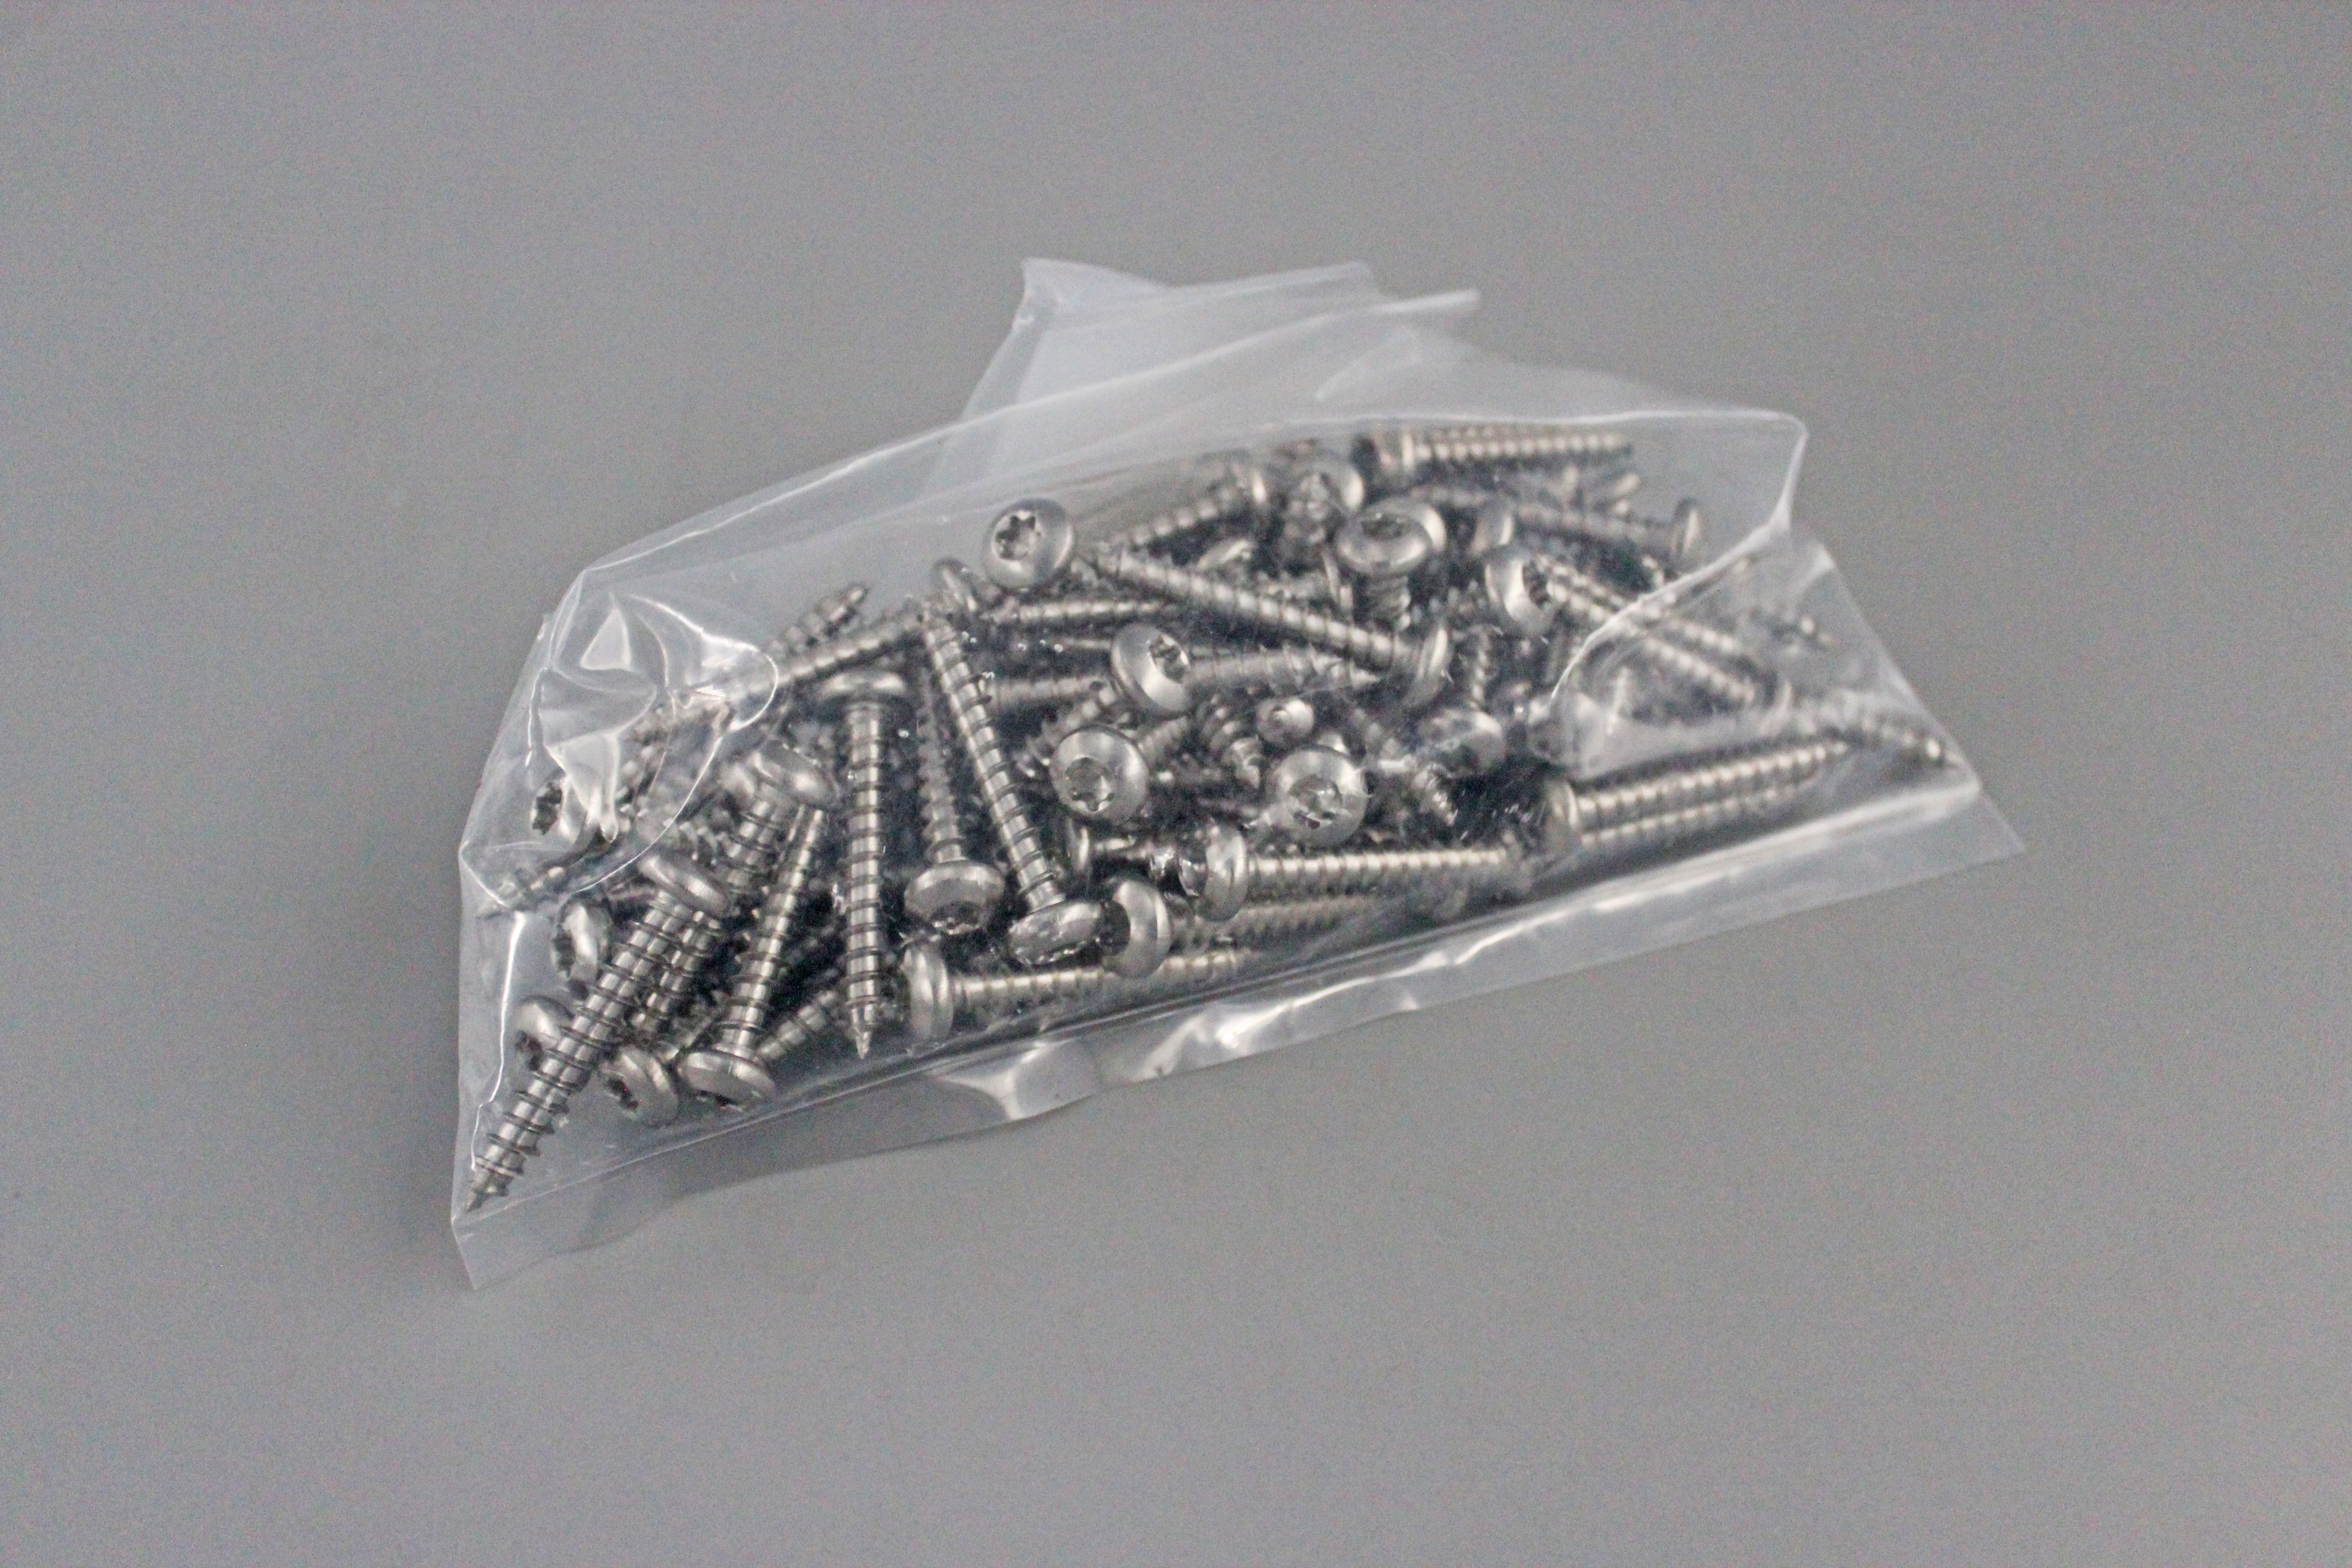 Sstorx- Star Hd -Screw Set 80 Pcs - CLEARANCE SAFETY COVERS